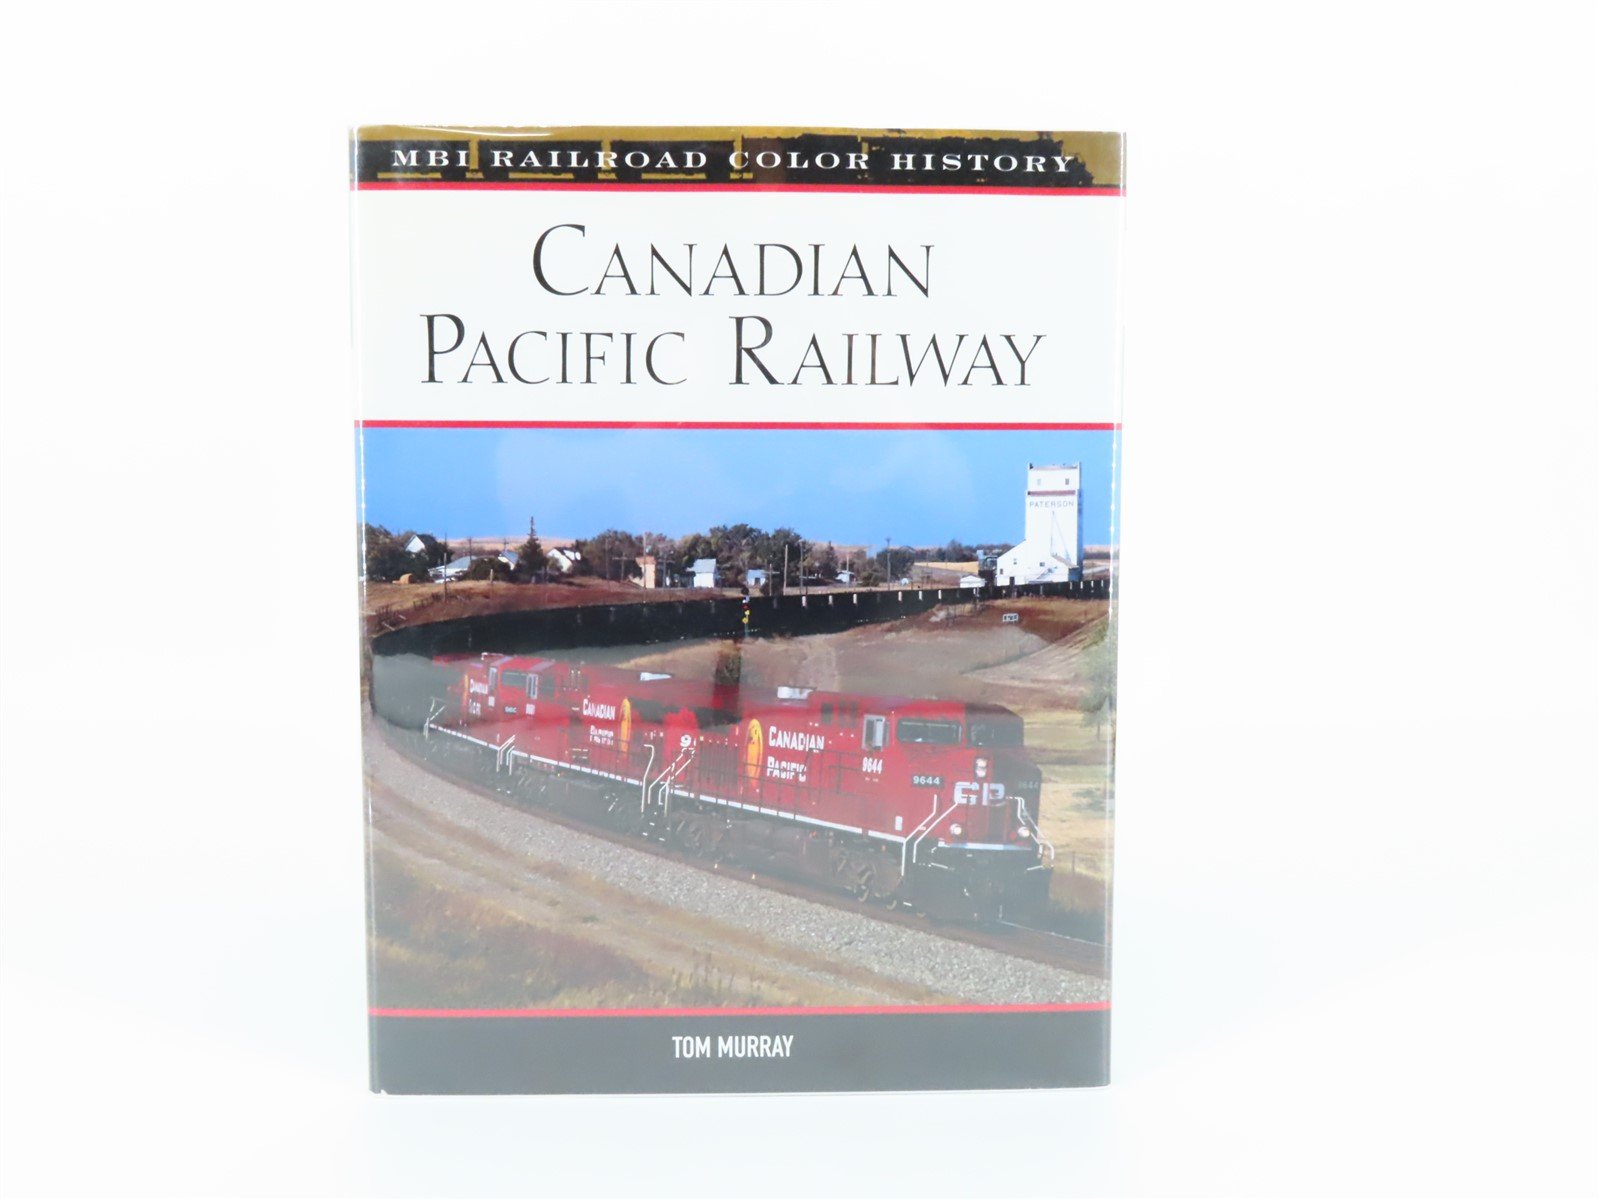 MBI Railroad Color History: Canadian Pacific by Tom Murray ©2006 HC Book